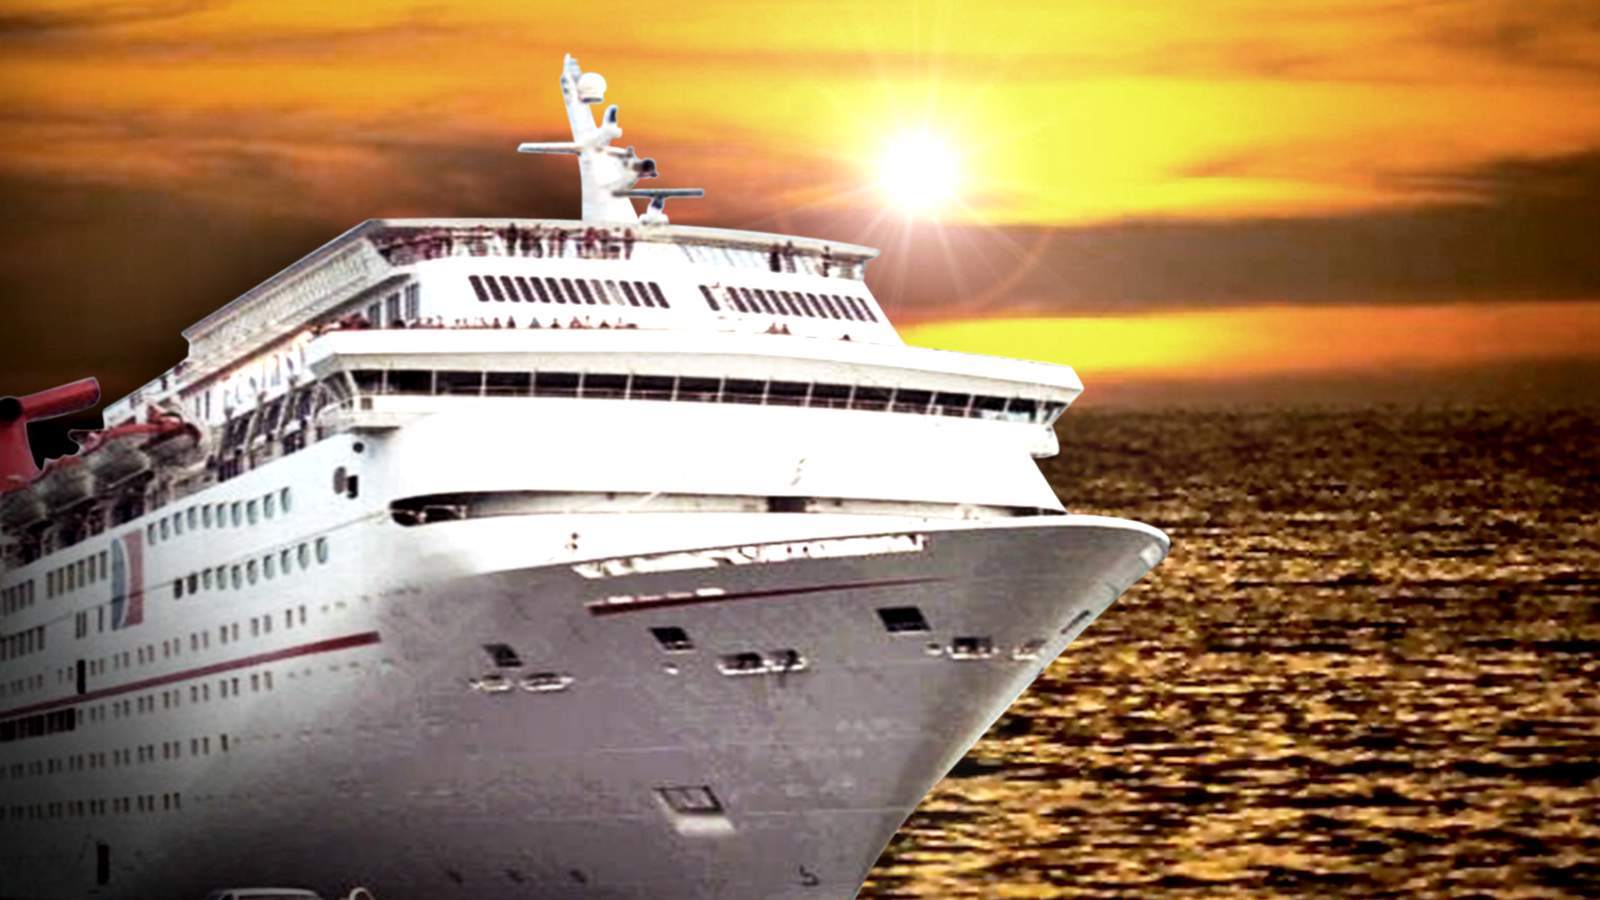 Jacksonville cruise ship cleared to sail after illness concern